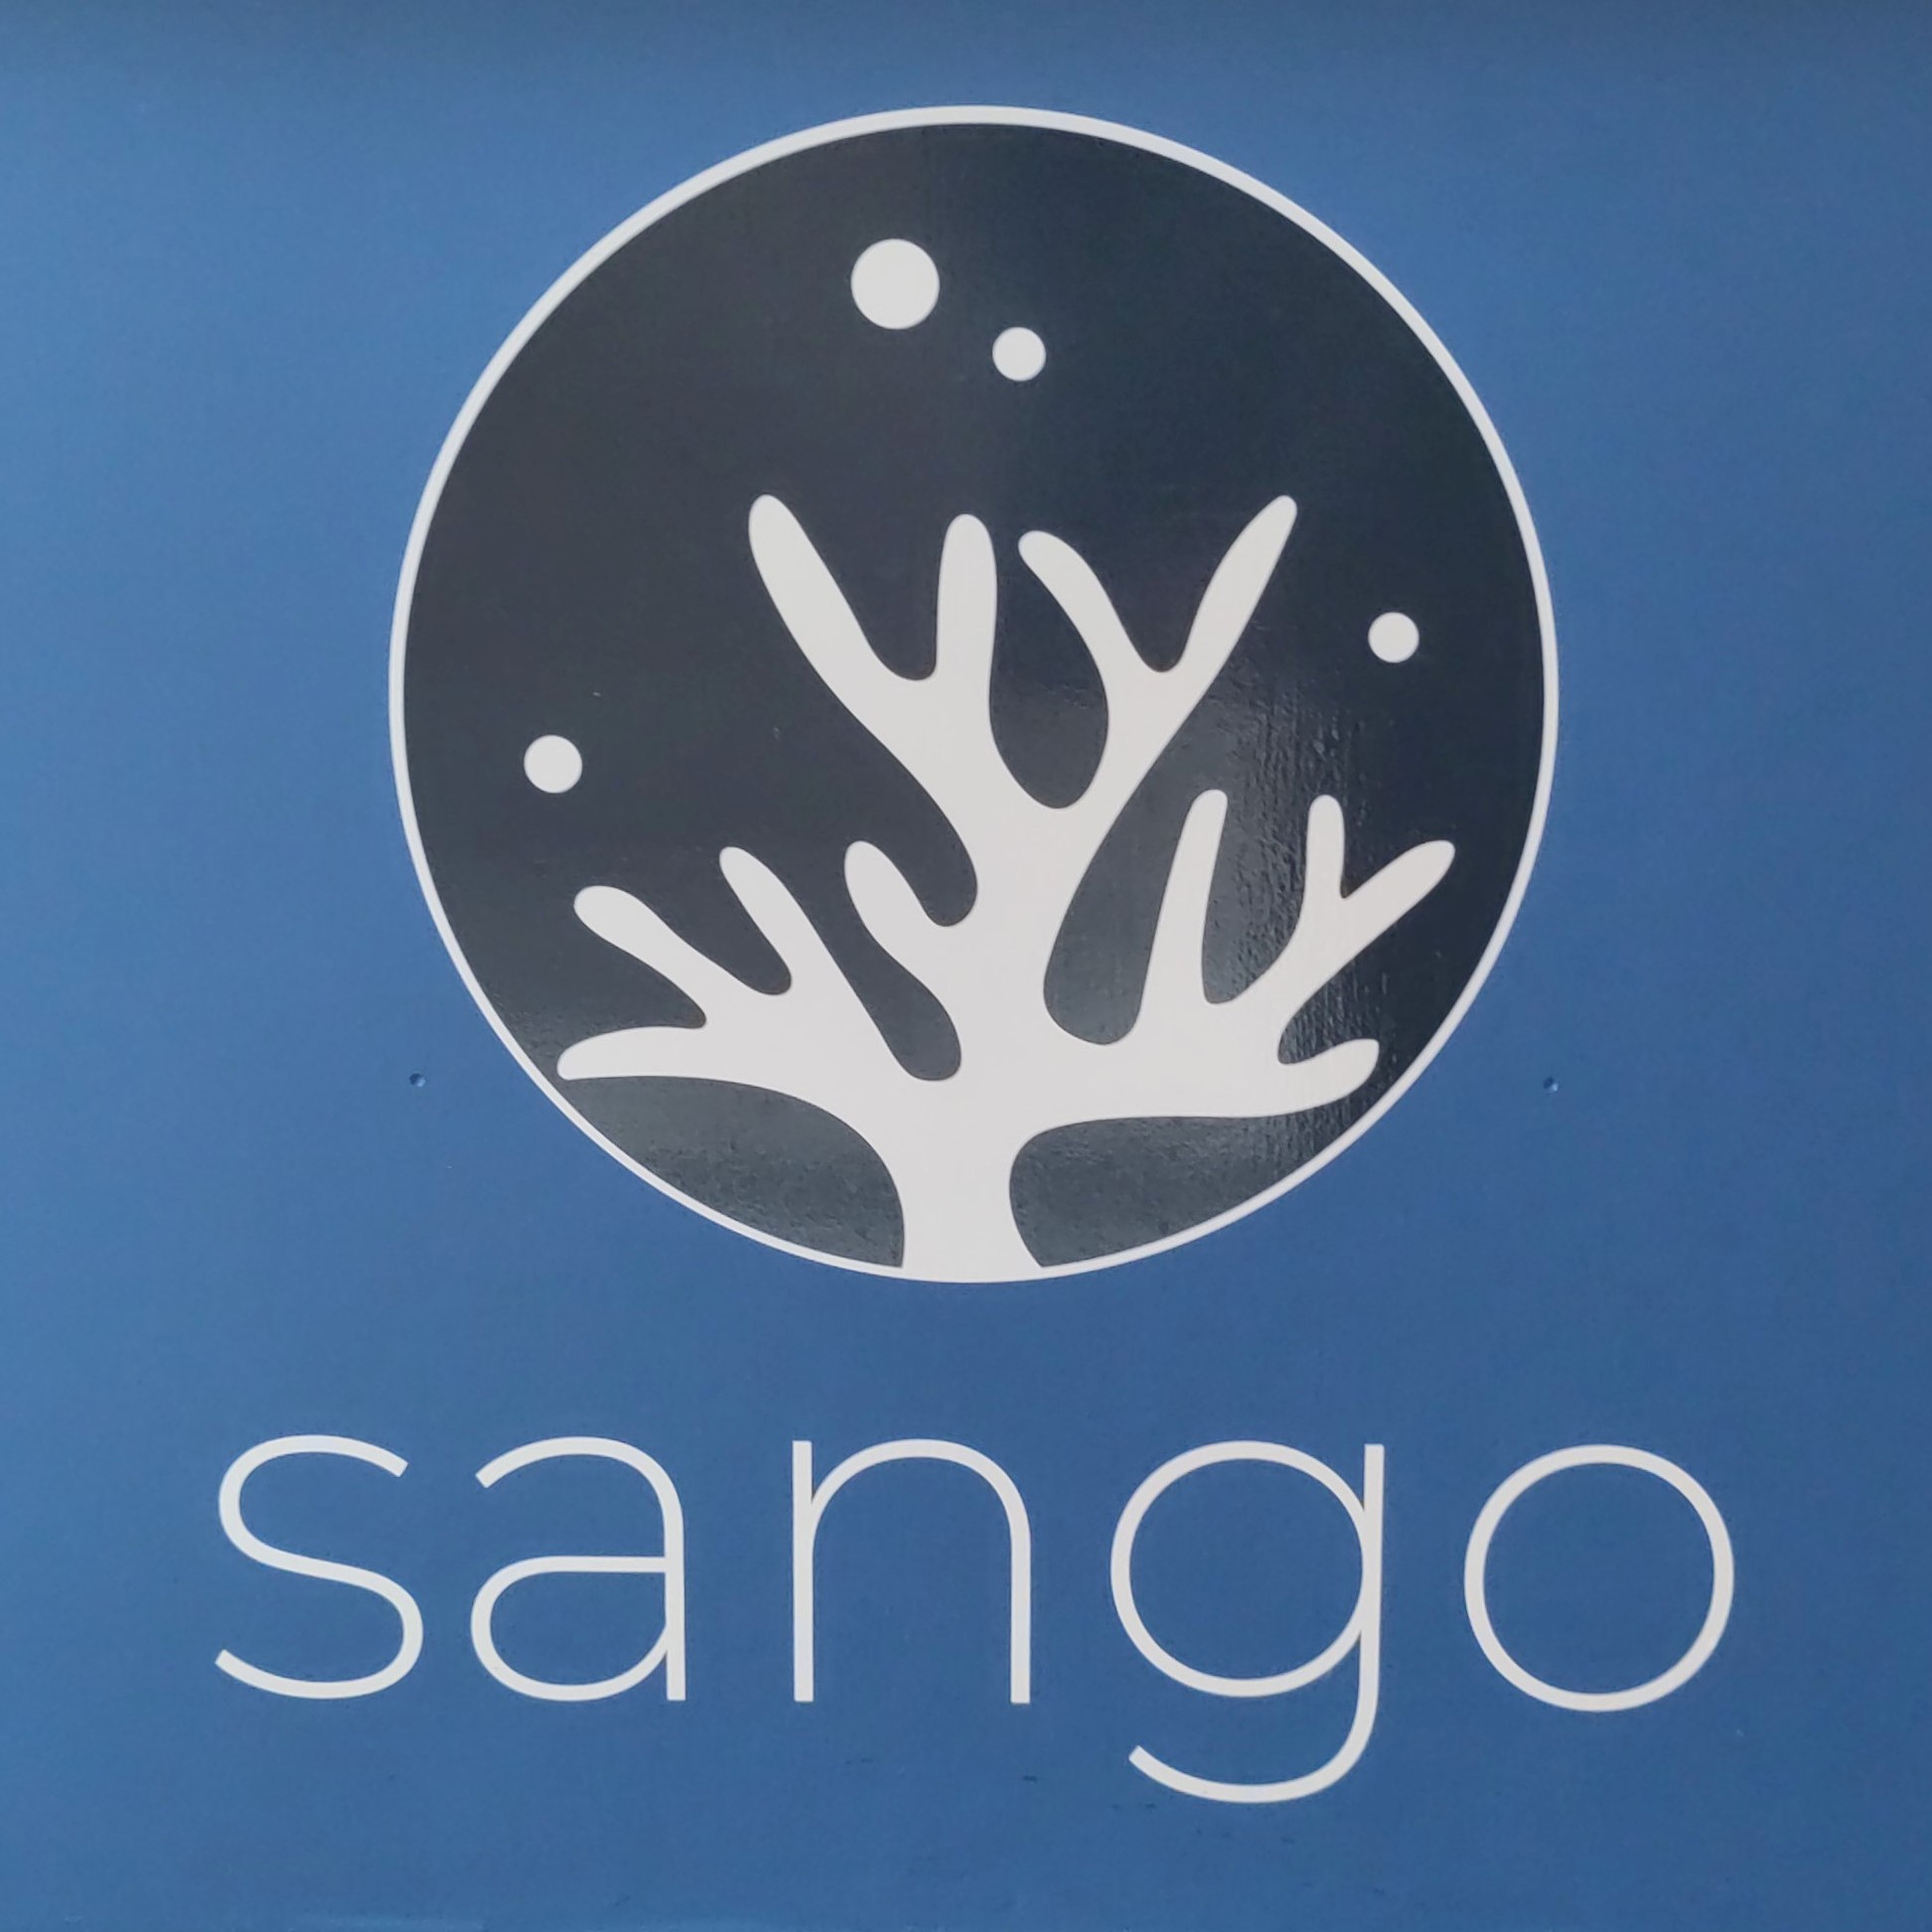 The Sango logo, from the front of the counter.